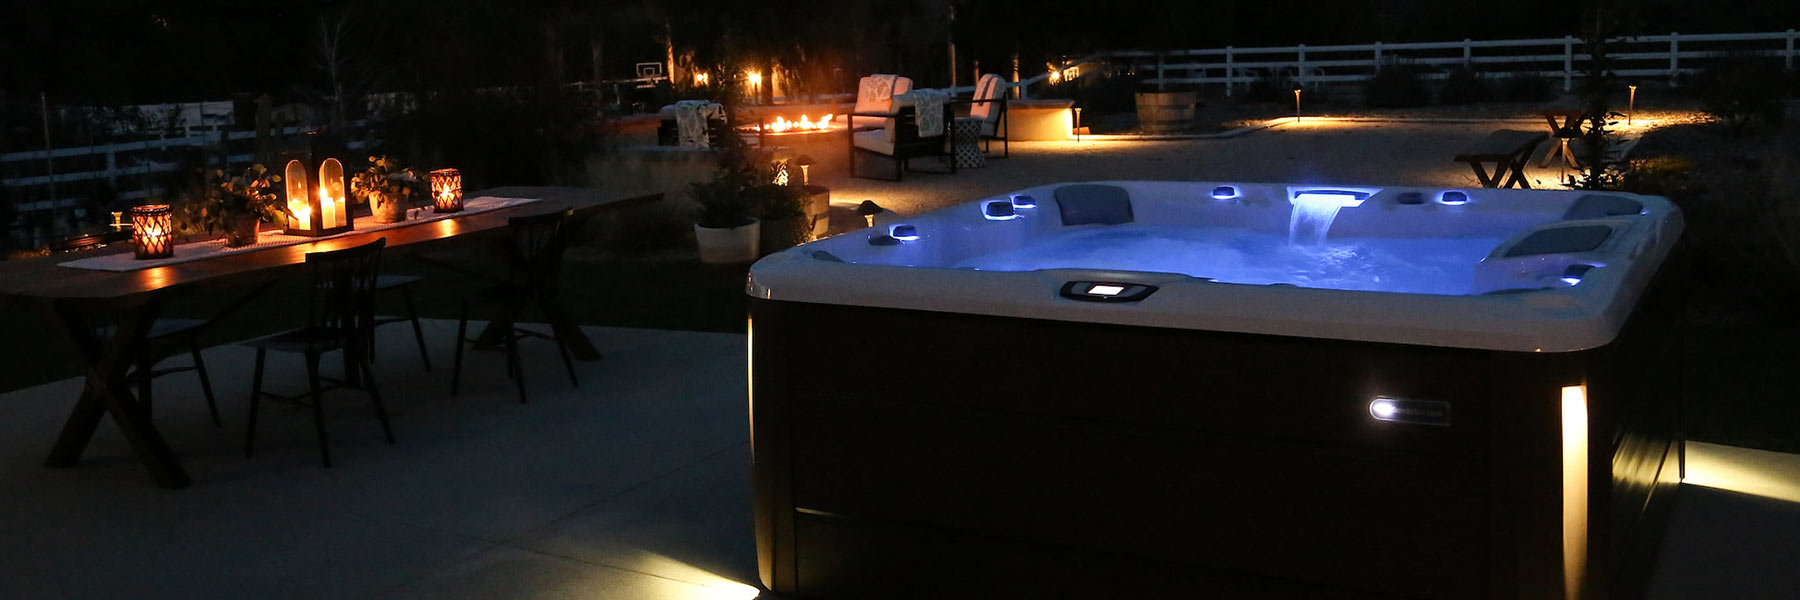 Pre-Owned Hot Tubs